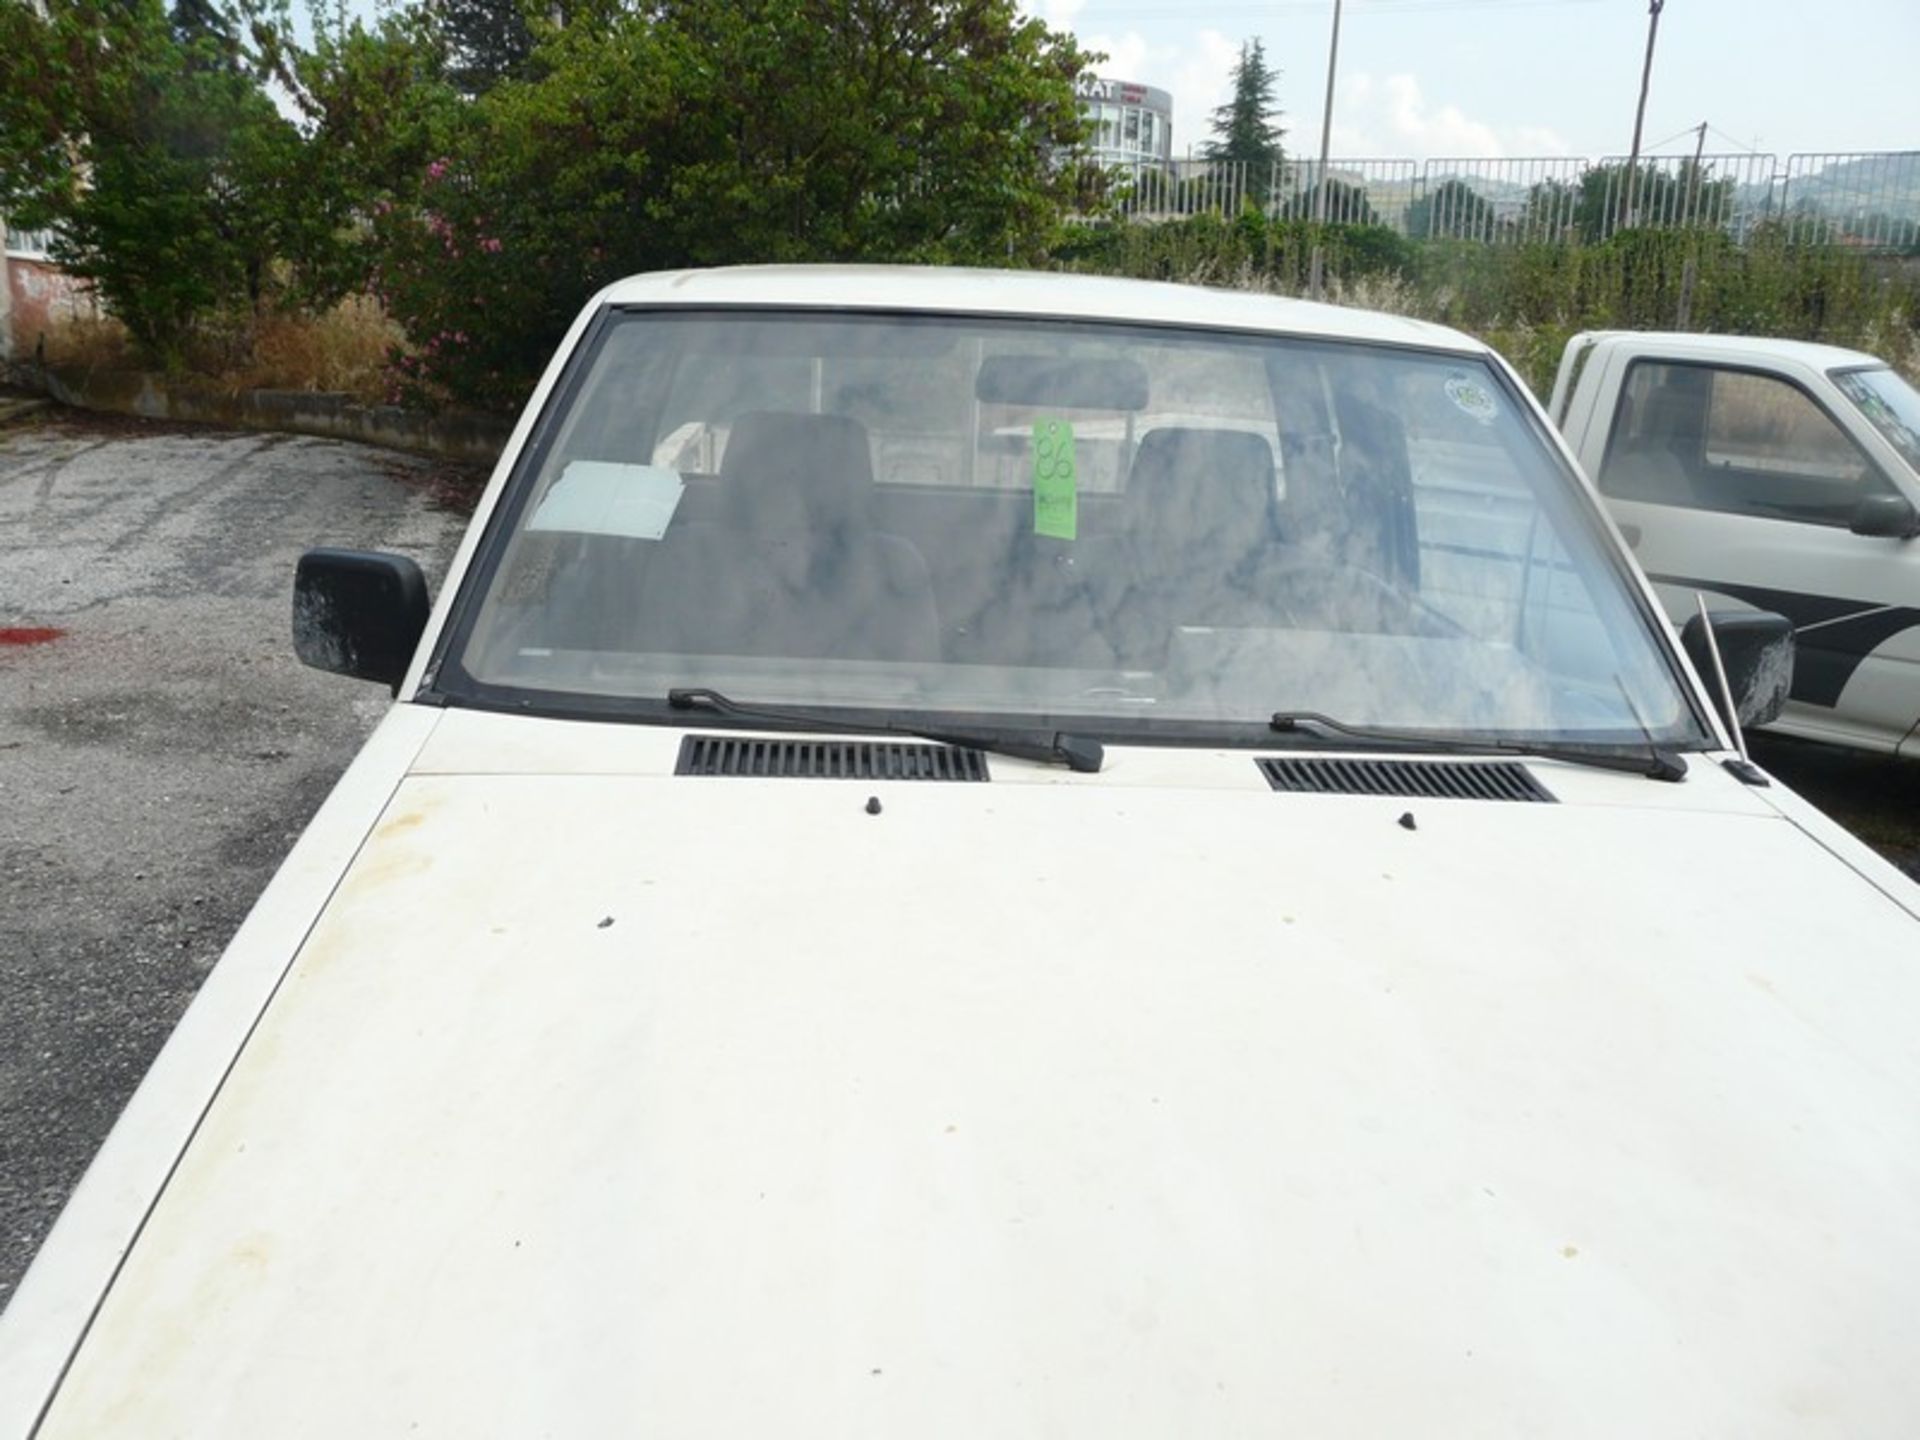 NISSAN KING CAB , REG: NBK 3437,PICK UP, PETROL ,KM 354381, WORKING CONDITION , MISSING BATTERY (